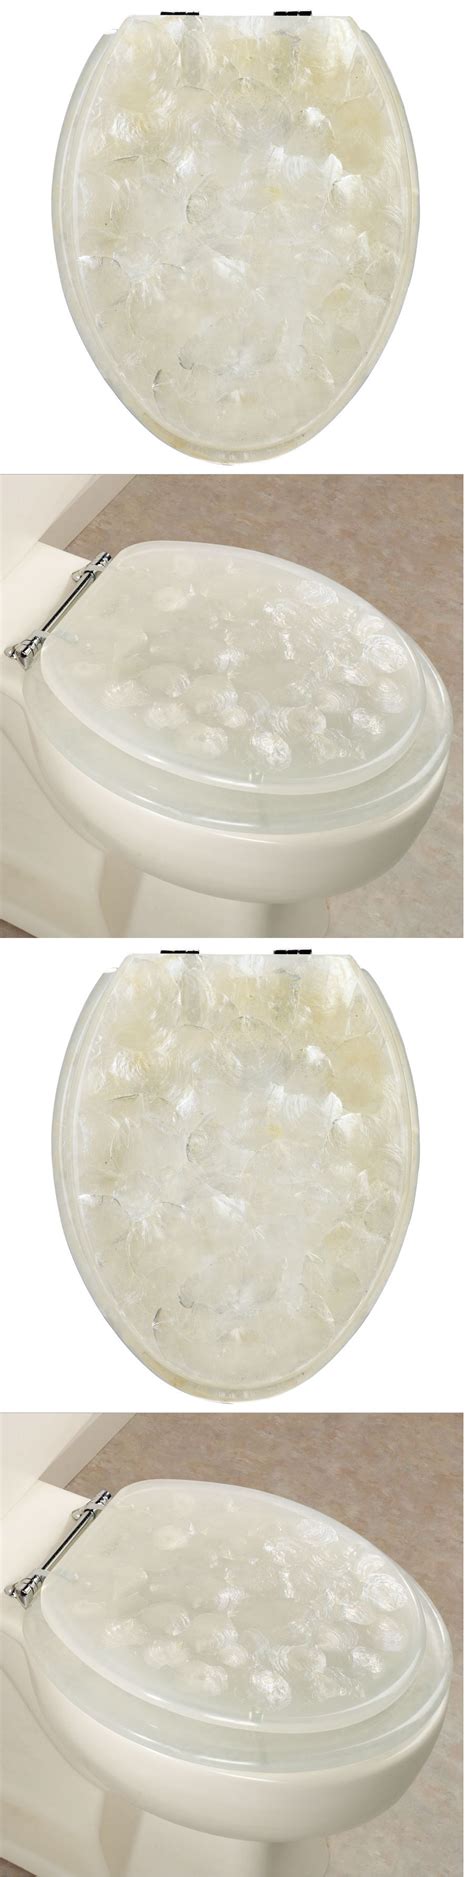 Toilet Seats 37637 Elongated Toilet Seat Lid Cover Mother Of Pearl